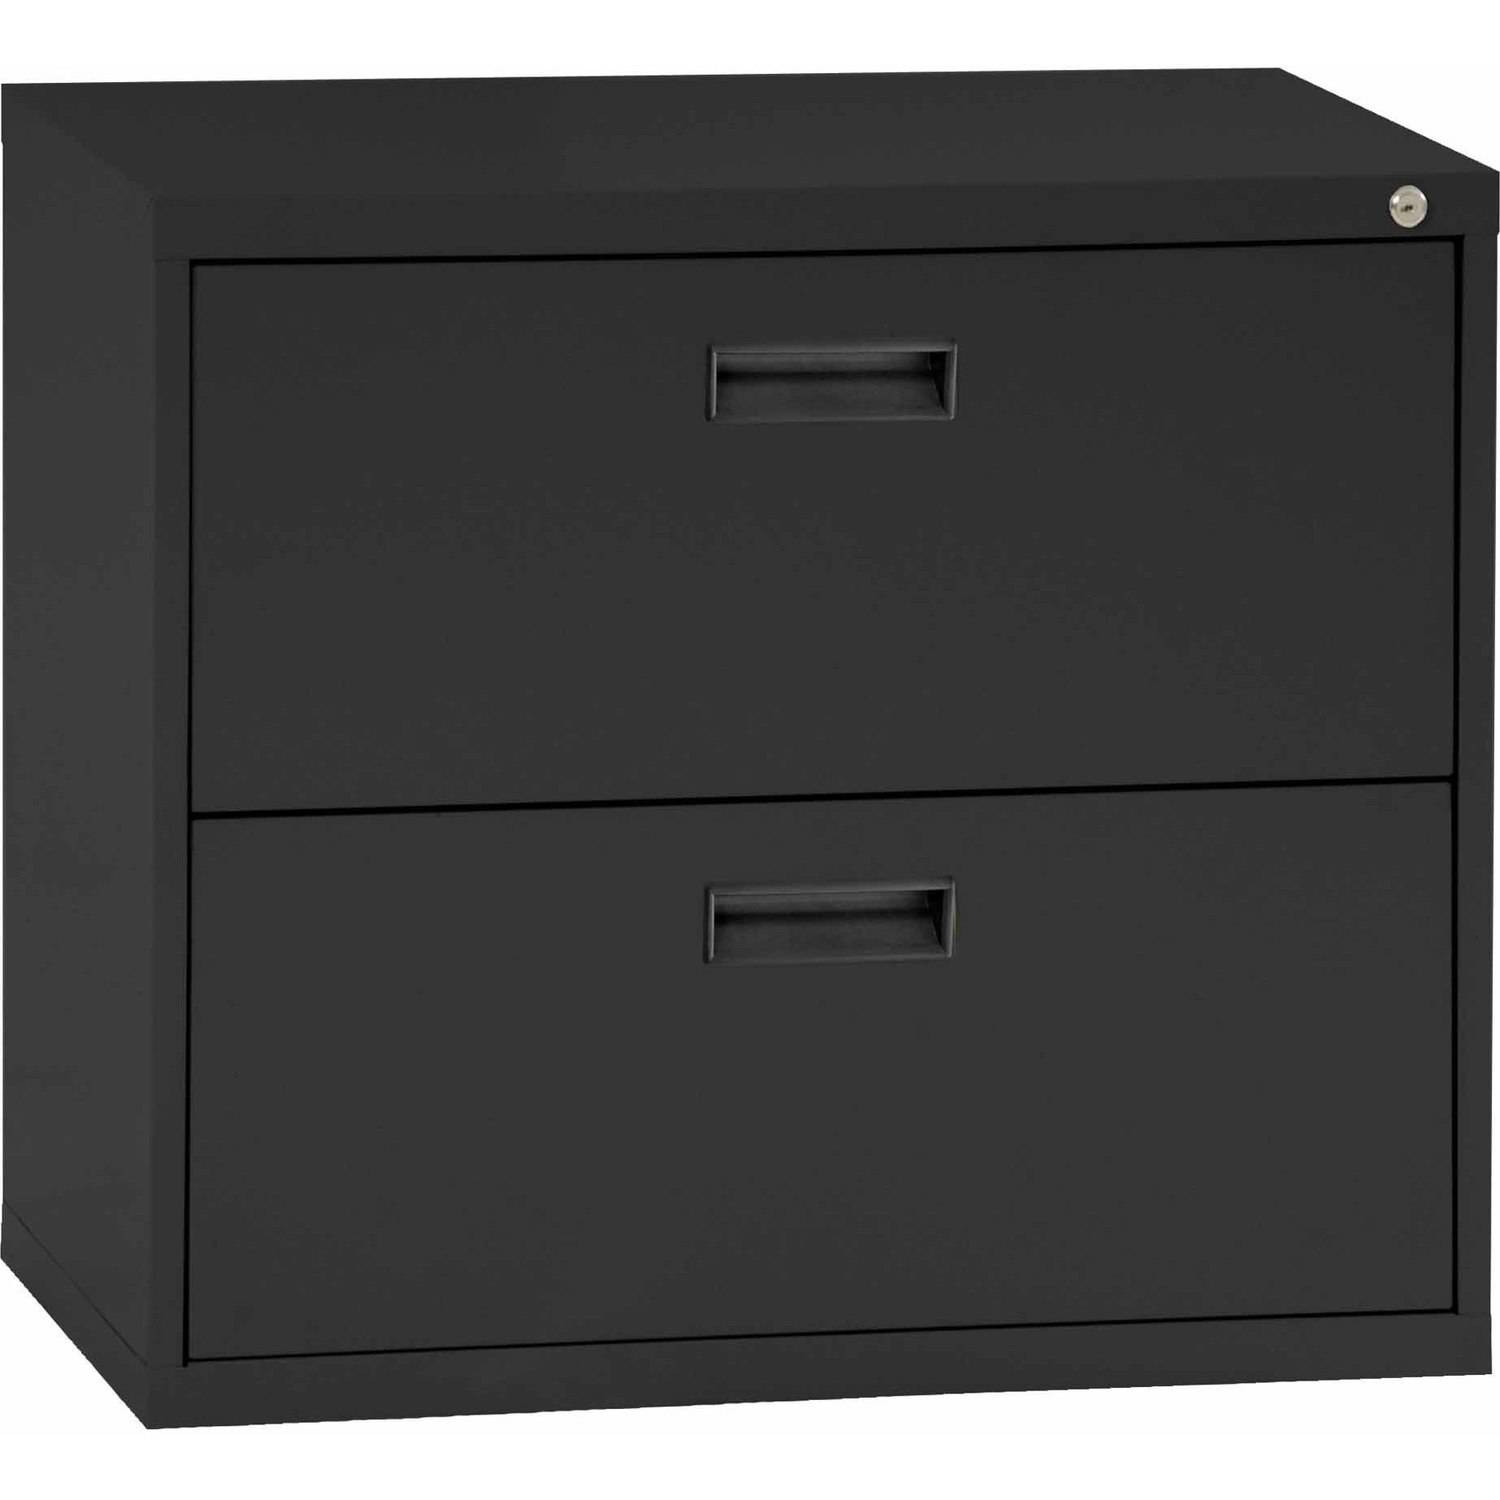 Sandusky Steel Lateral File Cabinet With Plastic Handle 2 Drawers pertaining to proportions 1500 X 1500